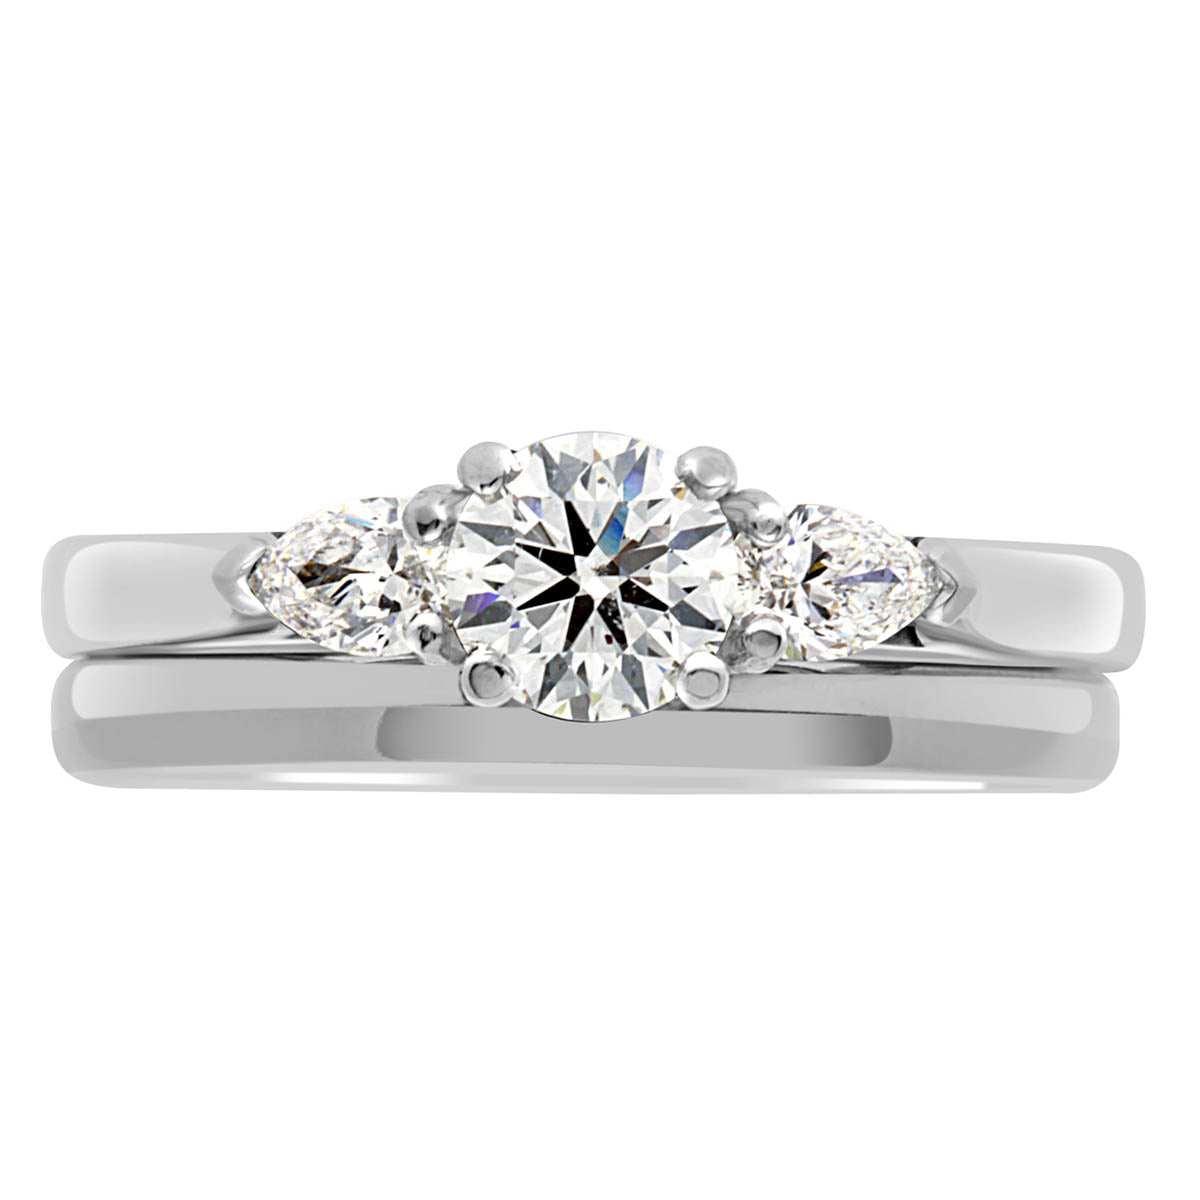 Round and Pear Diamond Ring in white gold with plain wedding ring